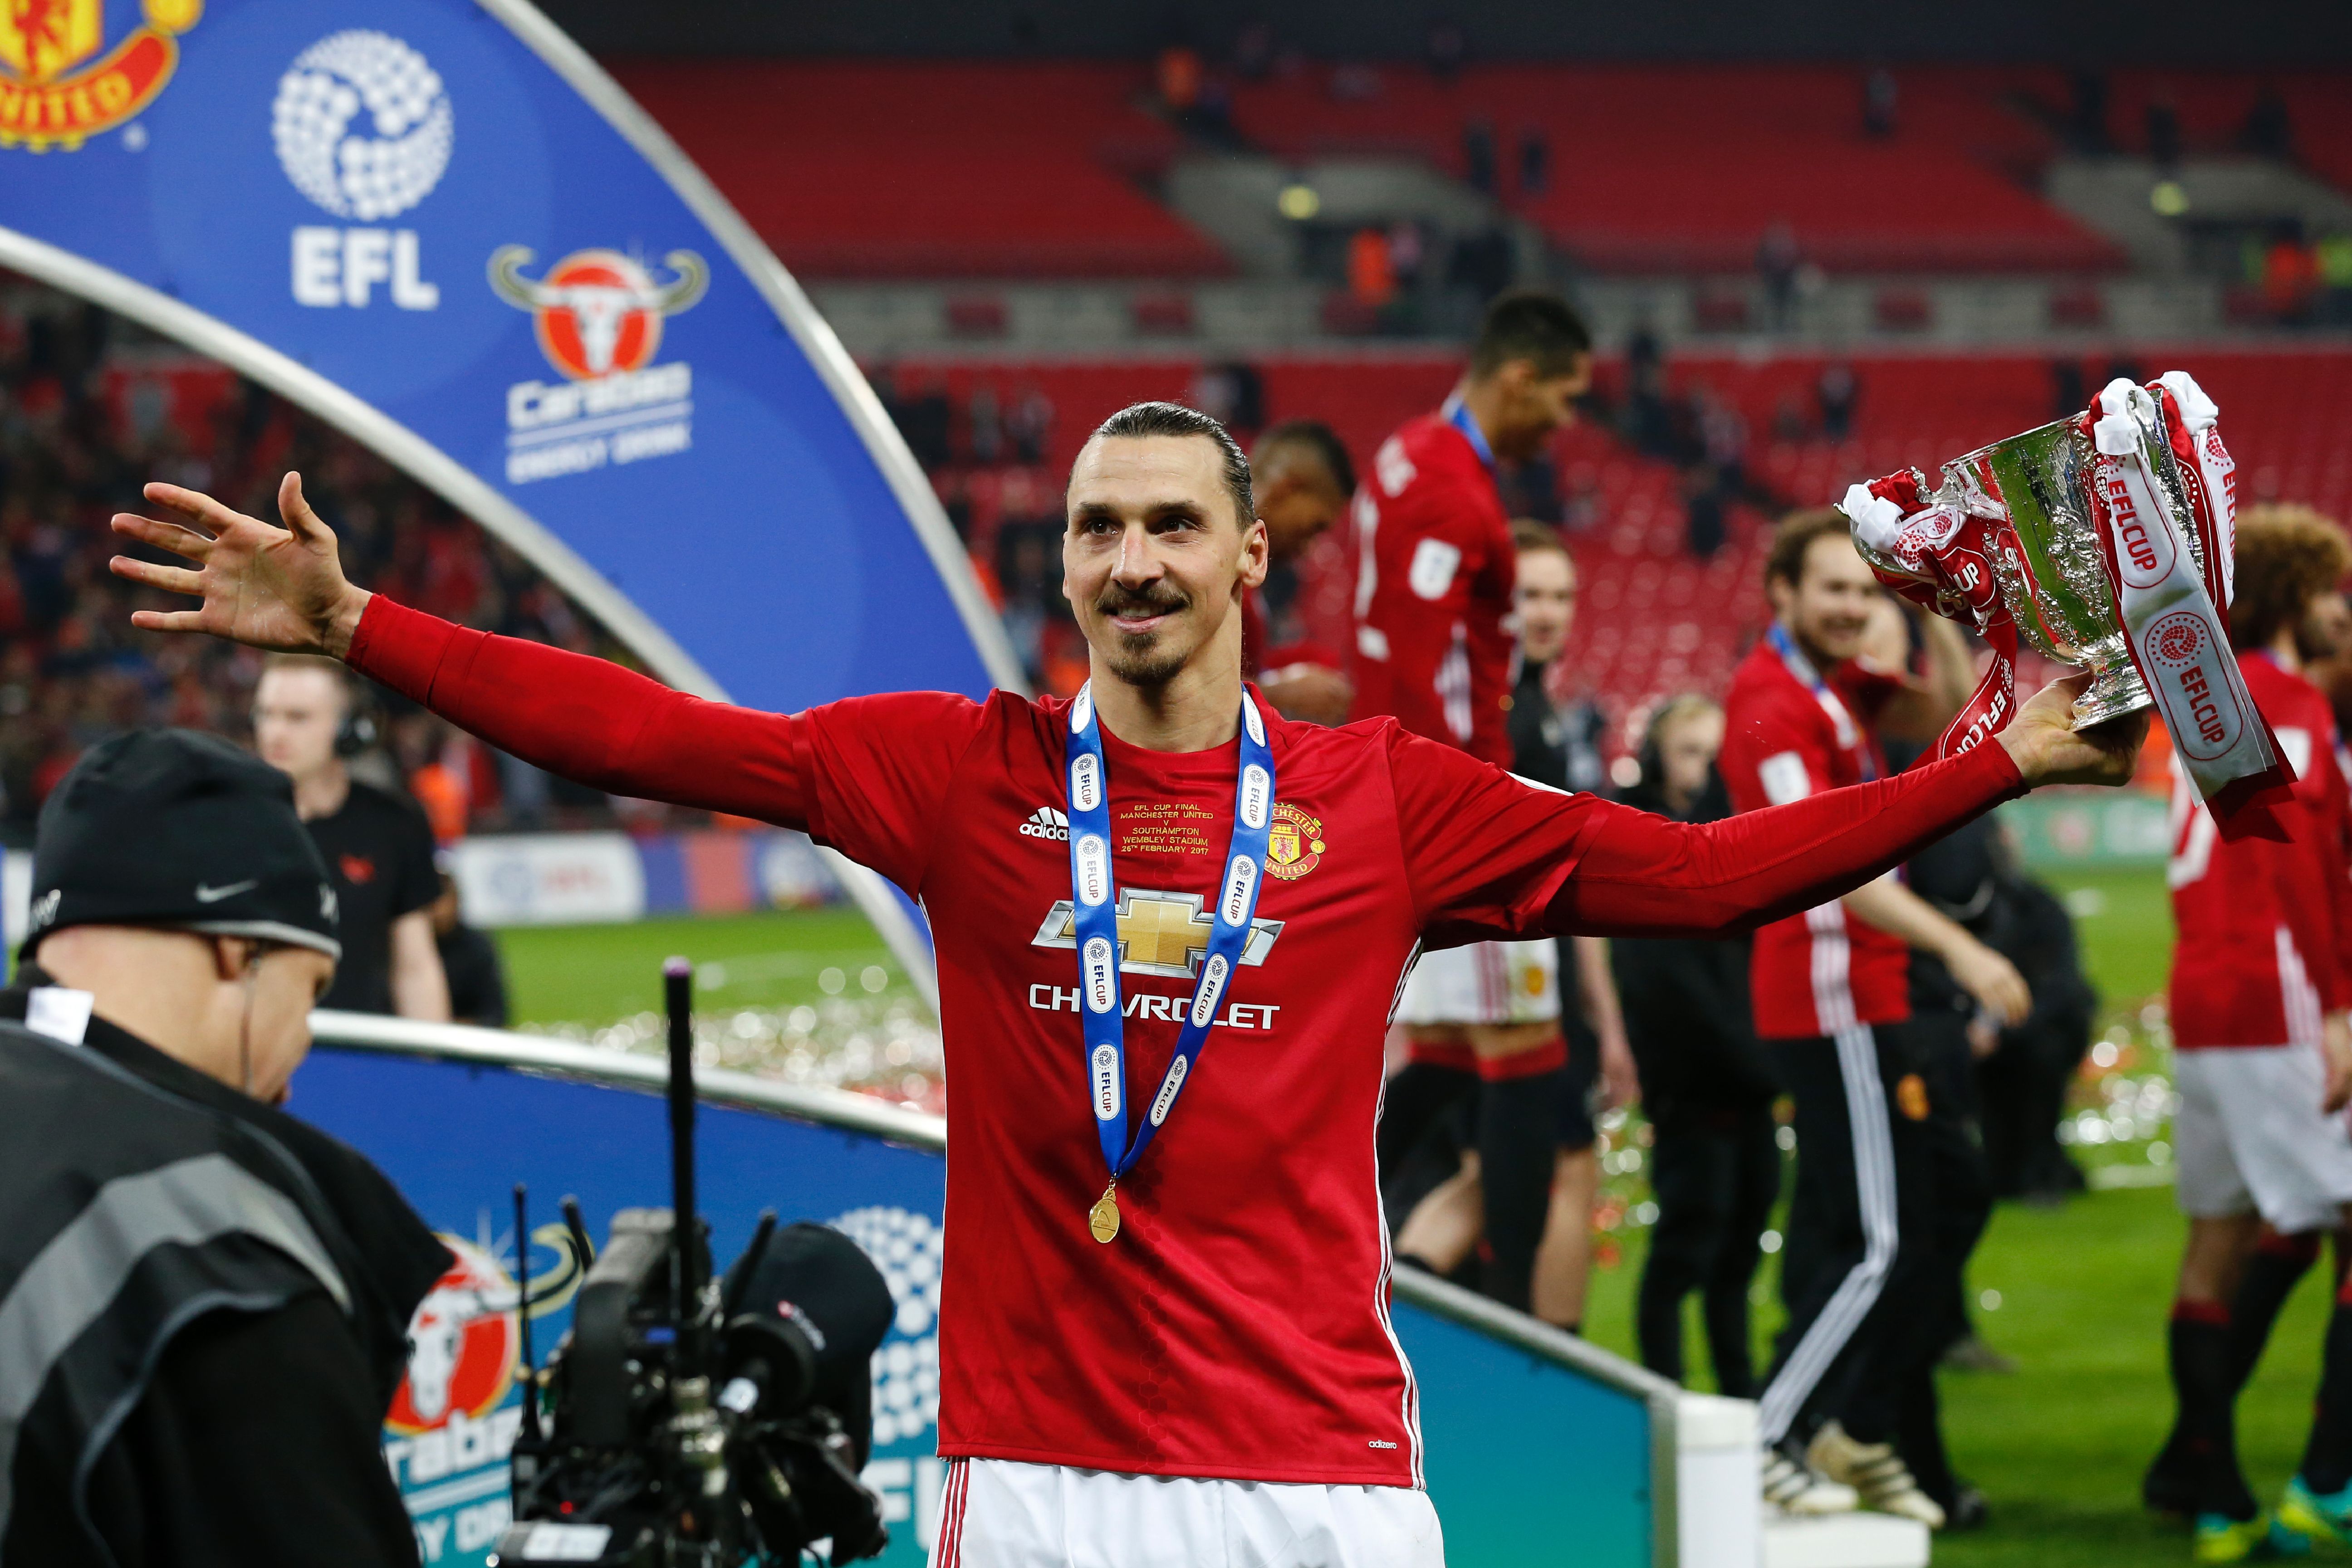 Manchester United's Swedish striker Zlatan Ibrahimovic celebrates with the trophy on the pitch after their victory in the English League Cup final football match between Manchester United and Southampton at Wembley stadium in north London on February 26, 2017.
Zlatan Ibrahimovic sealed the first major silverware of Jose Mourinho's Manchester United reign and broke Southampton's hearts as the Swedish star's late goal clinched a dramatic 3-2 victory in Sunday's League Cup final. / AFP / Ian KINGTON / RESTRICTED TO EDITORIAL USE. No use with unauthorized audio, video, data, fixture lists, club/league logos or 'live' services. Online in-match use limited to 75 images, no video emulation. No use in betting, games or single club/league/player publications.  /         (Photo credit should read IAN KINGTON/AFP/Getty Images)